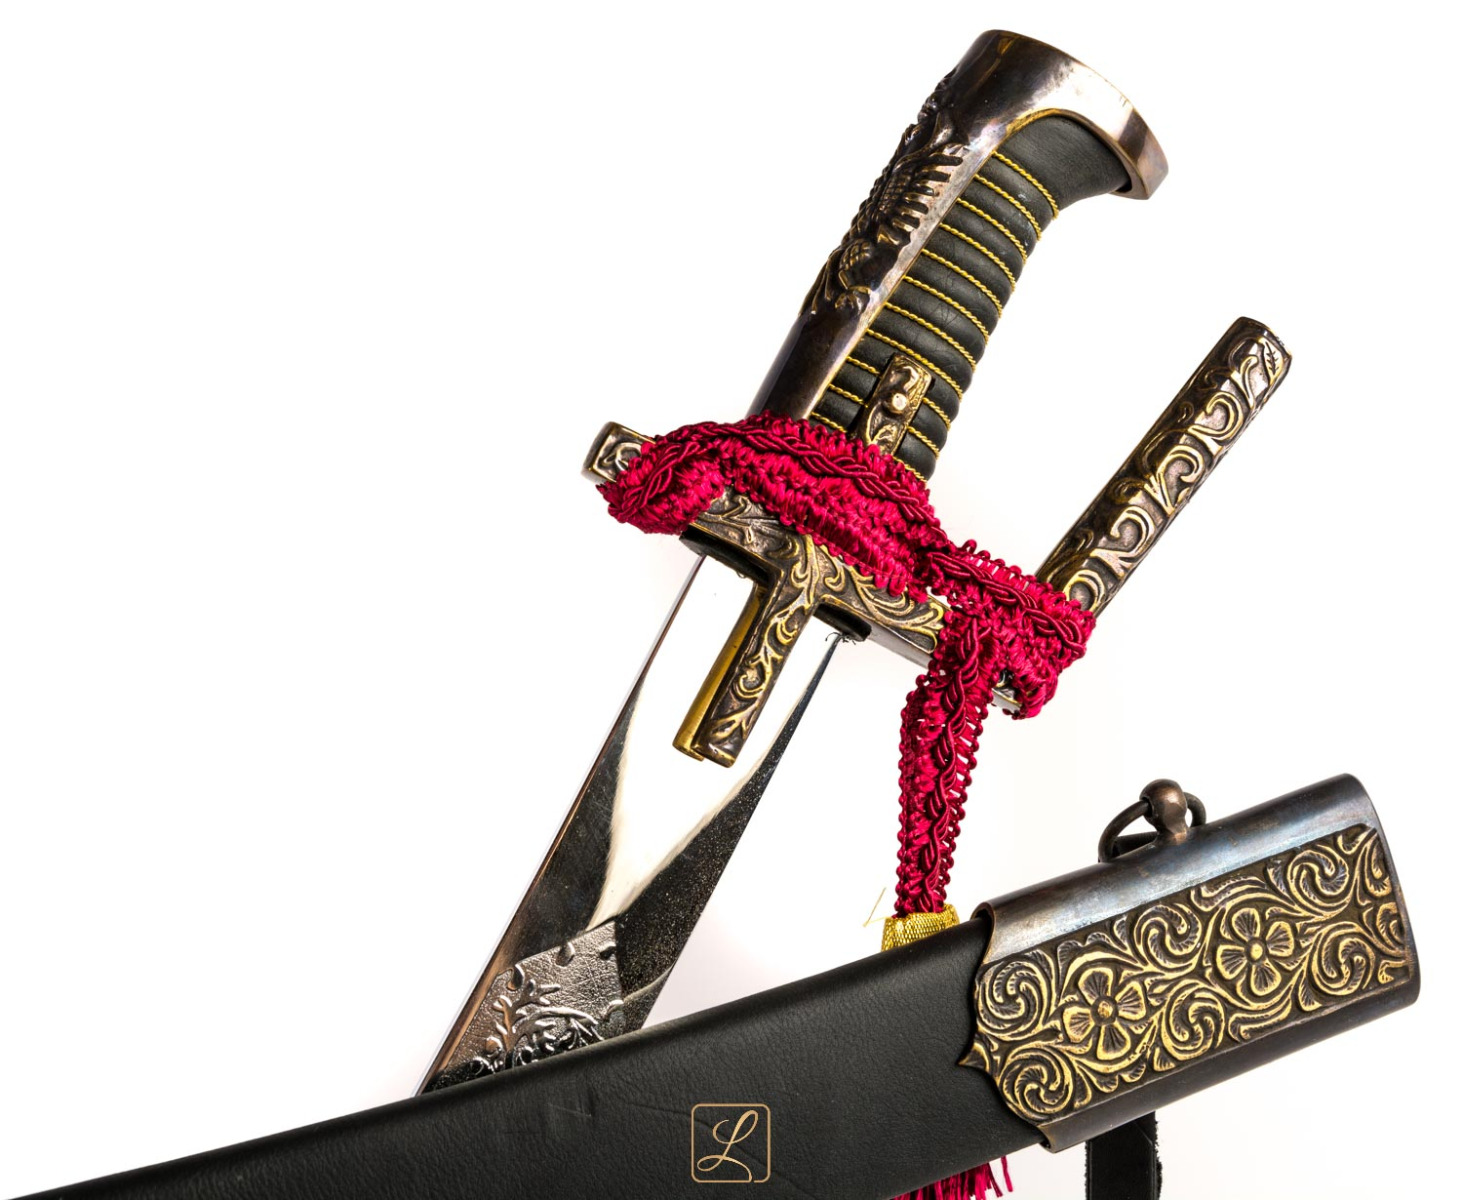 Polish Hussar saber from the first half XVII century with scabbard - replica